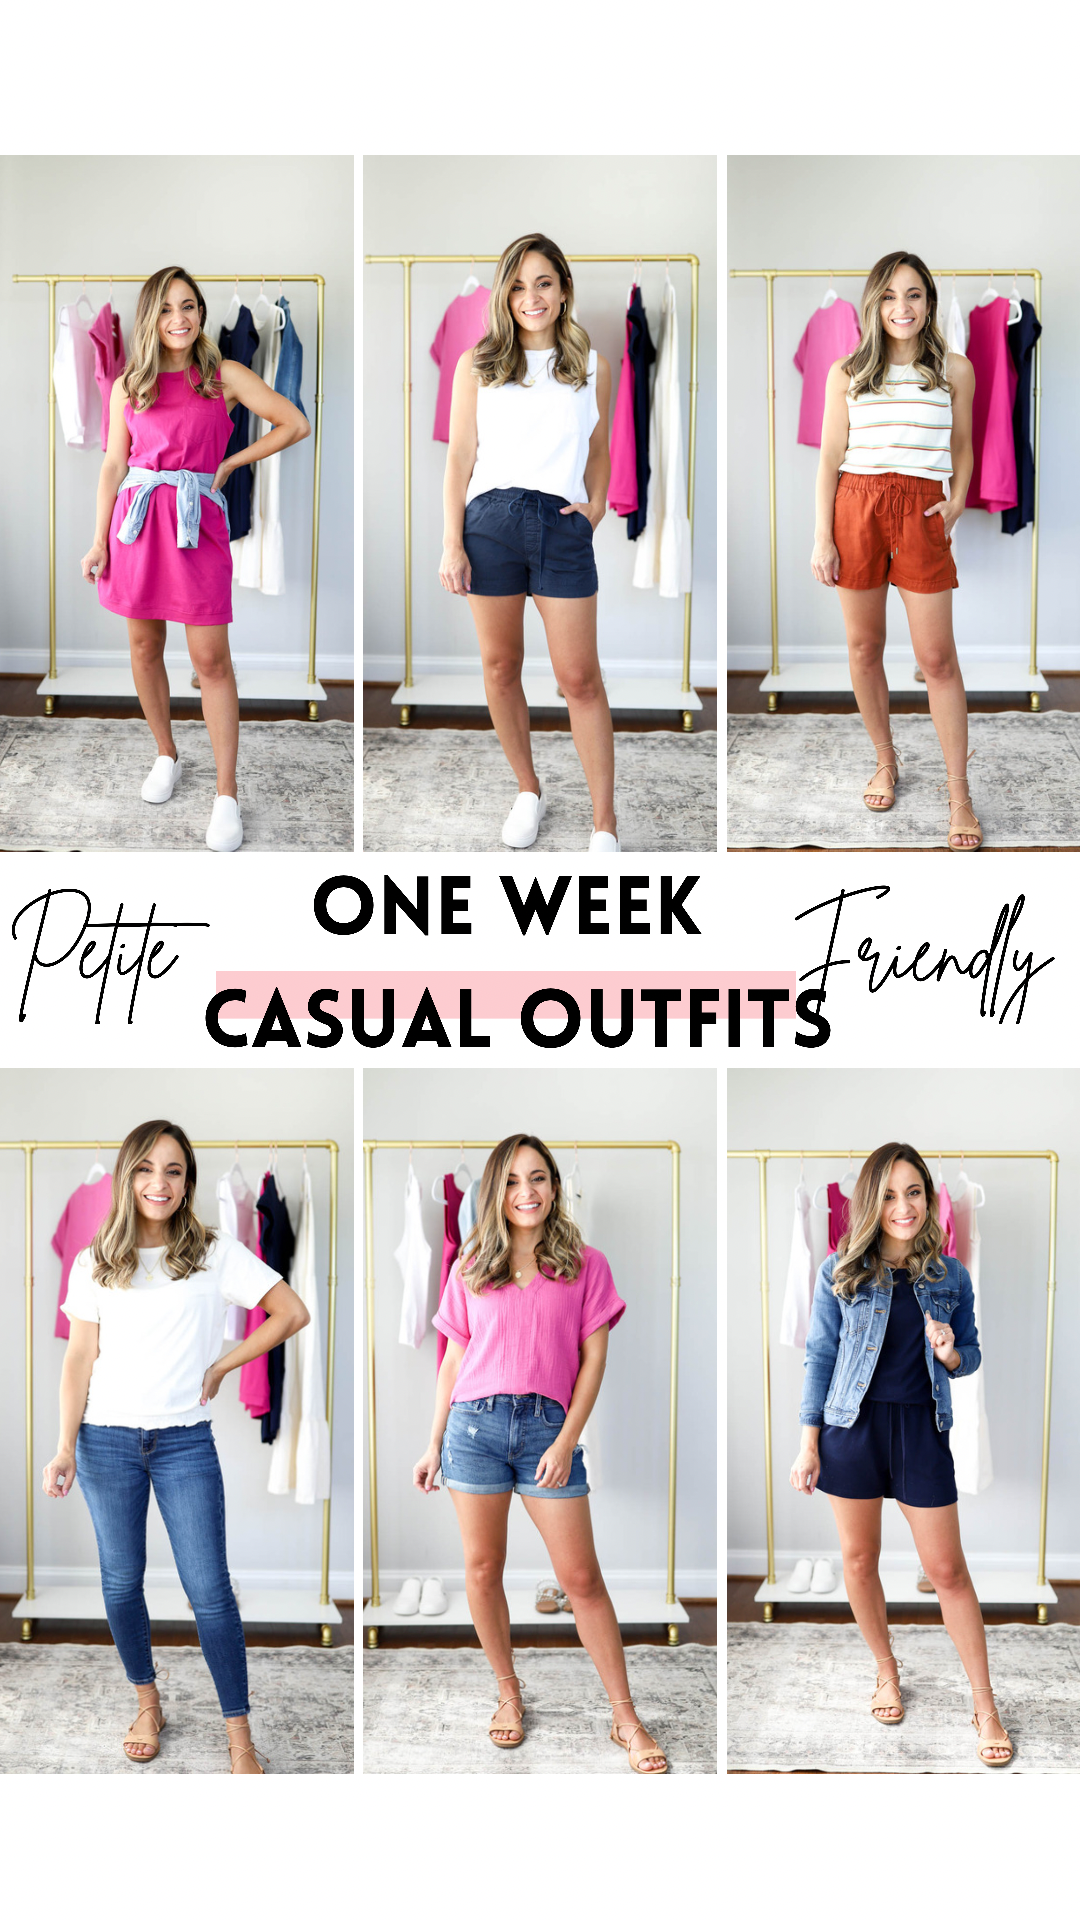 Uneasy: A Petite Casual Outfit